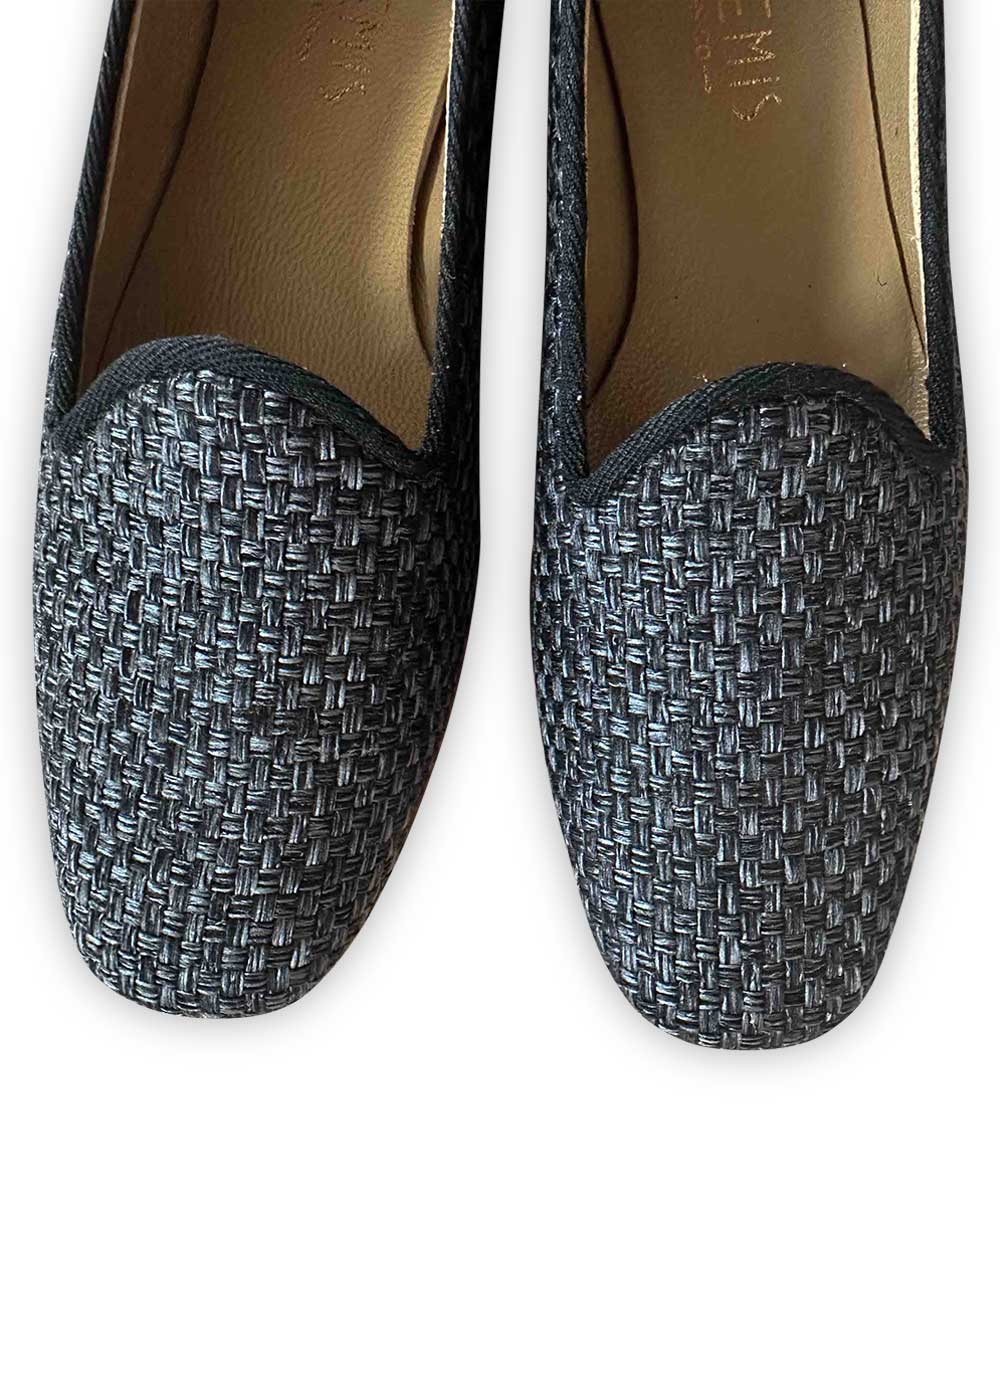 Artemis Design Co's Women's woven loafers in charcoal black offer a blend of elegance and comfort. Crafted with meticulous attention to detail, these loafers feature a woven design that adds texture and sophistication to any outfit. The charcoal black color lends a timeless and versatile appeal, perfect for both casual and formal occasions. (Front View)